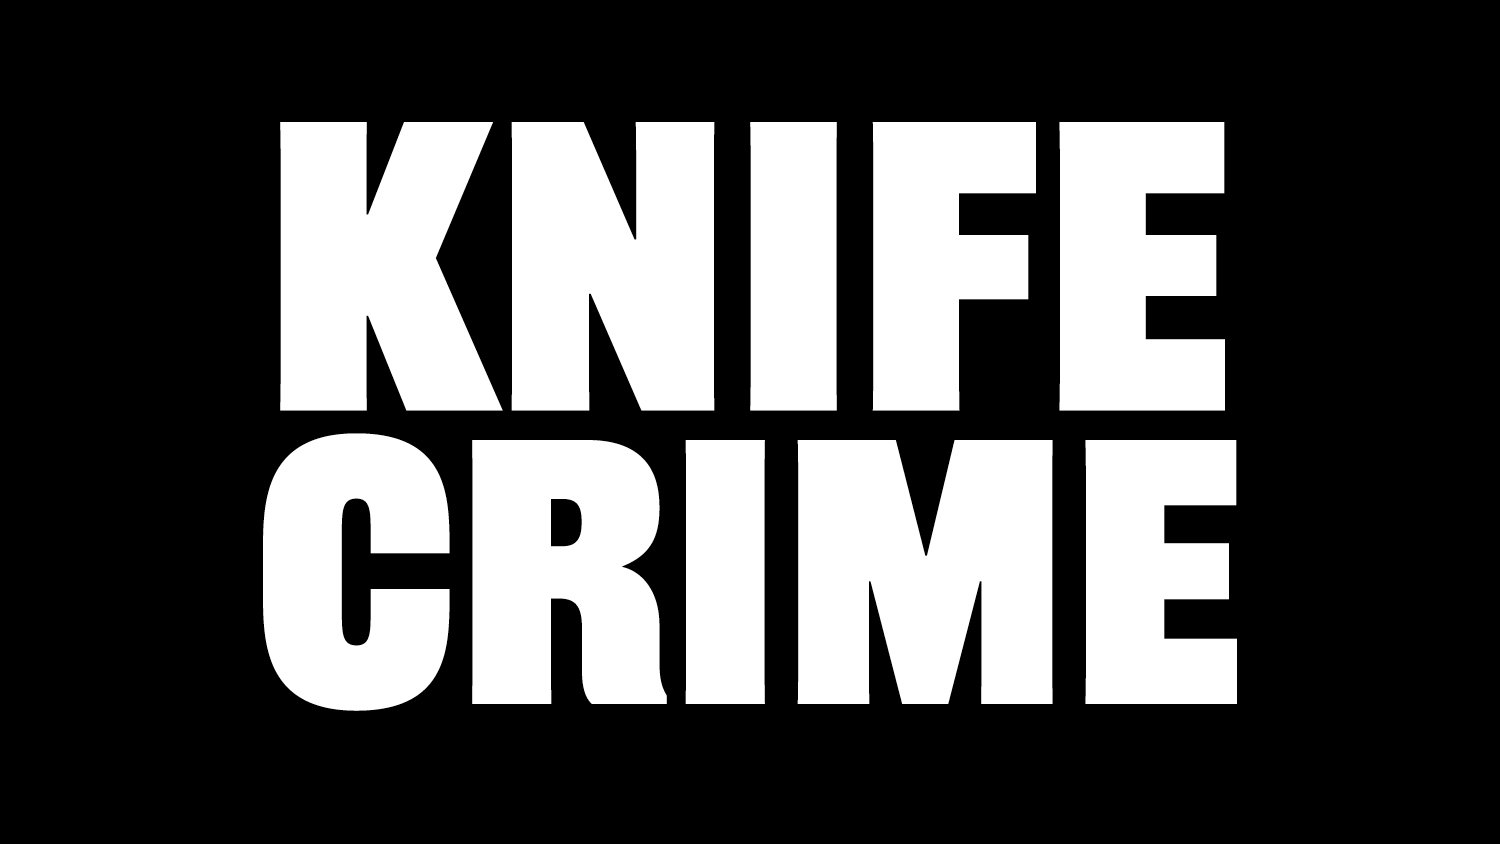 The words Knife Crime in white writing with a black background